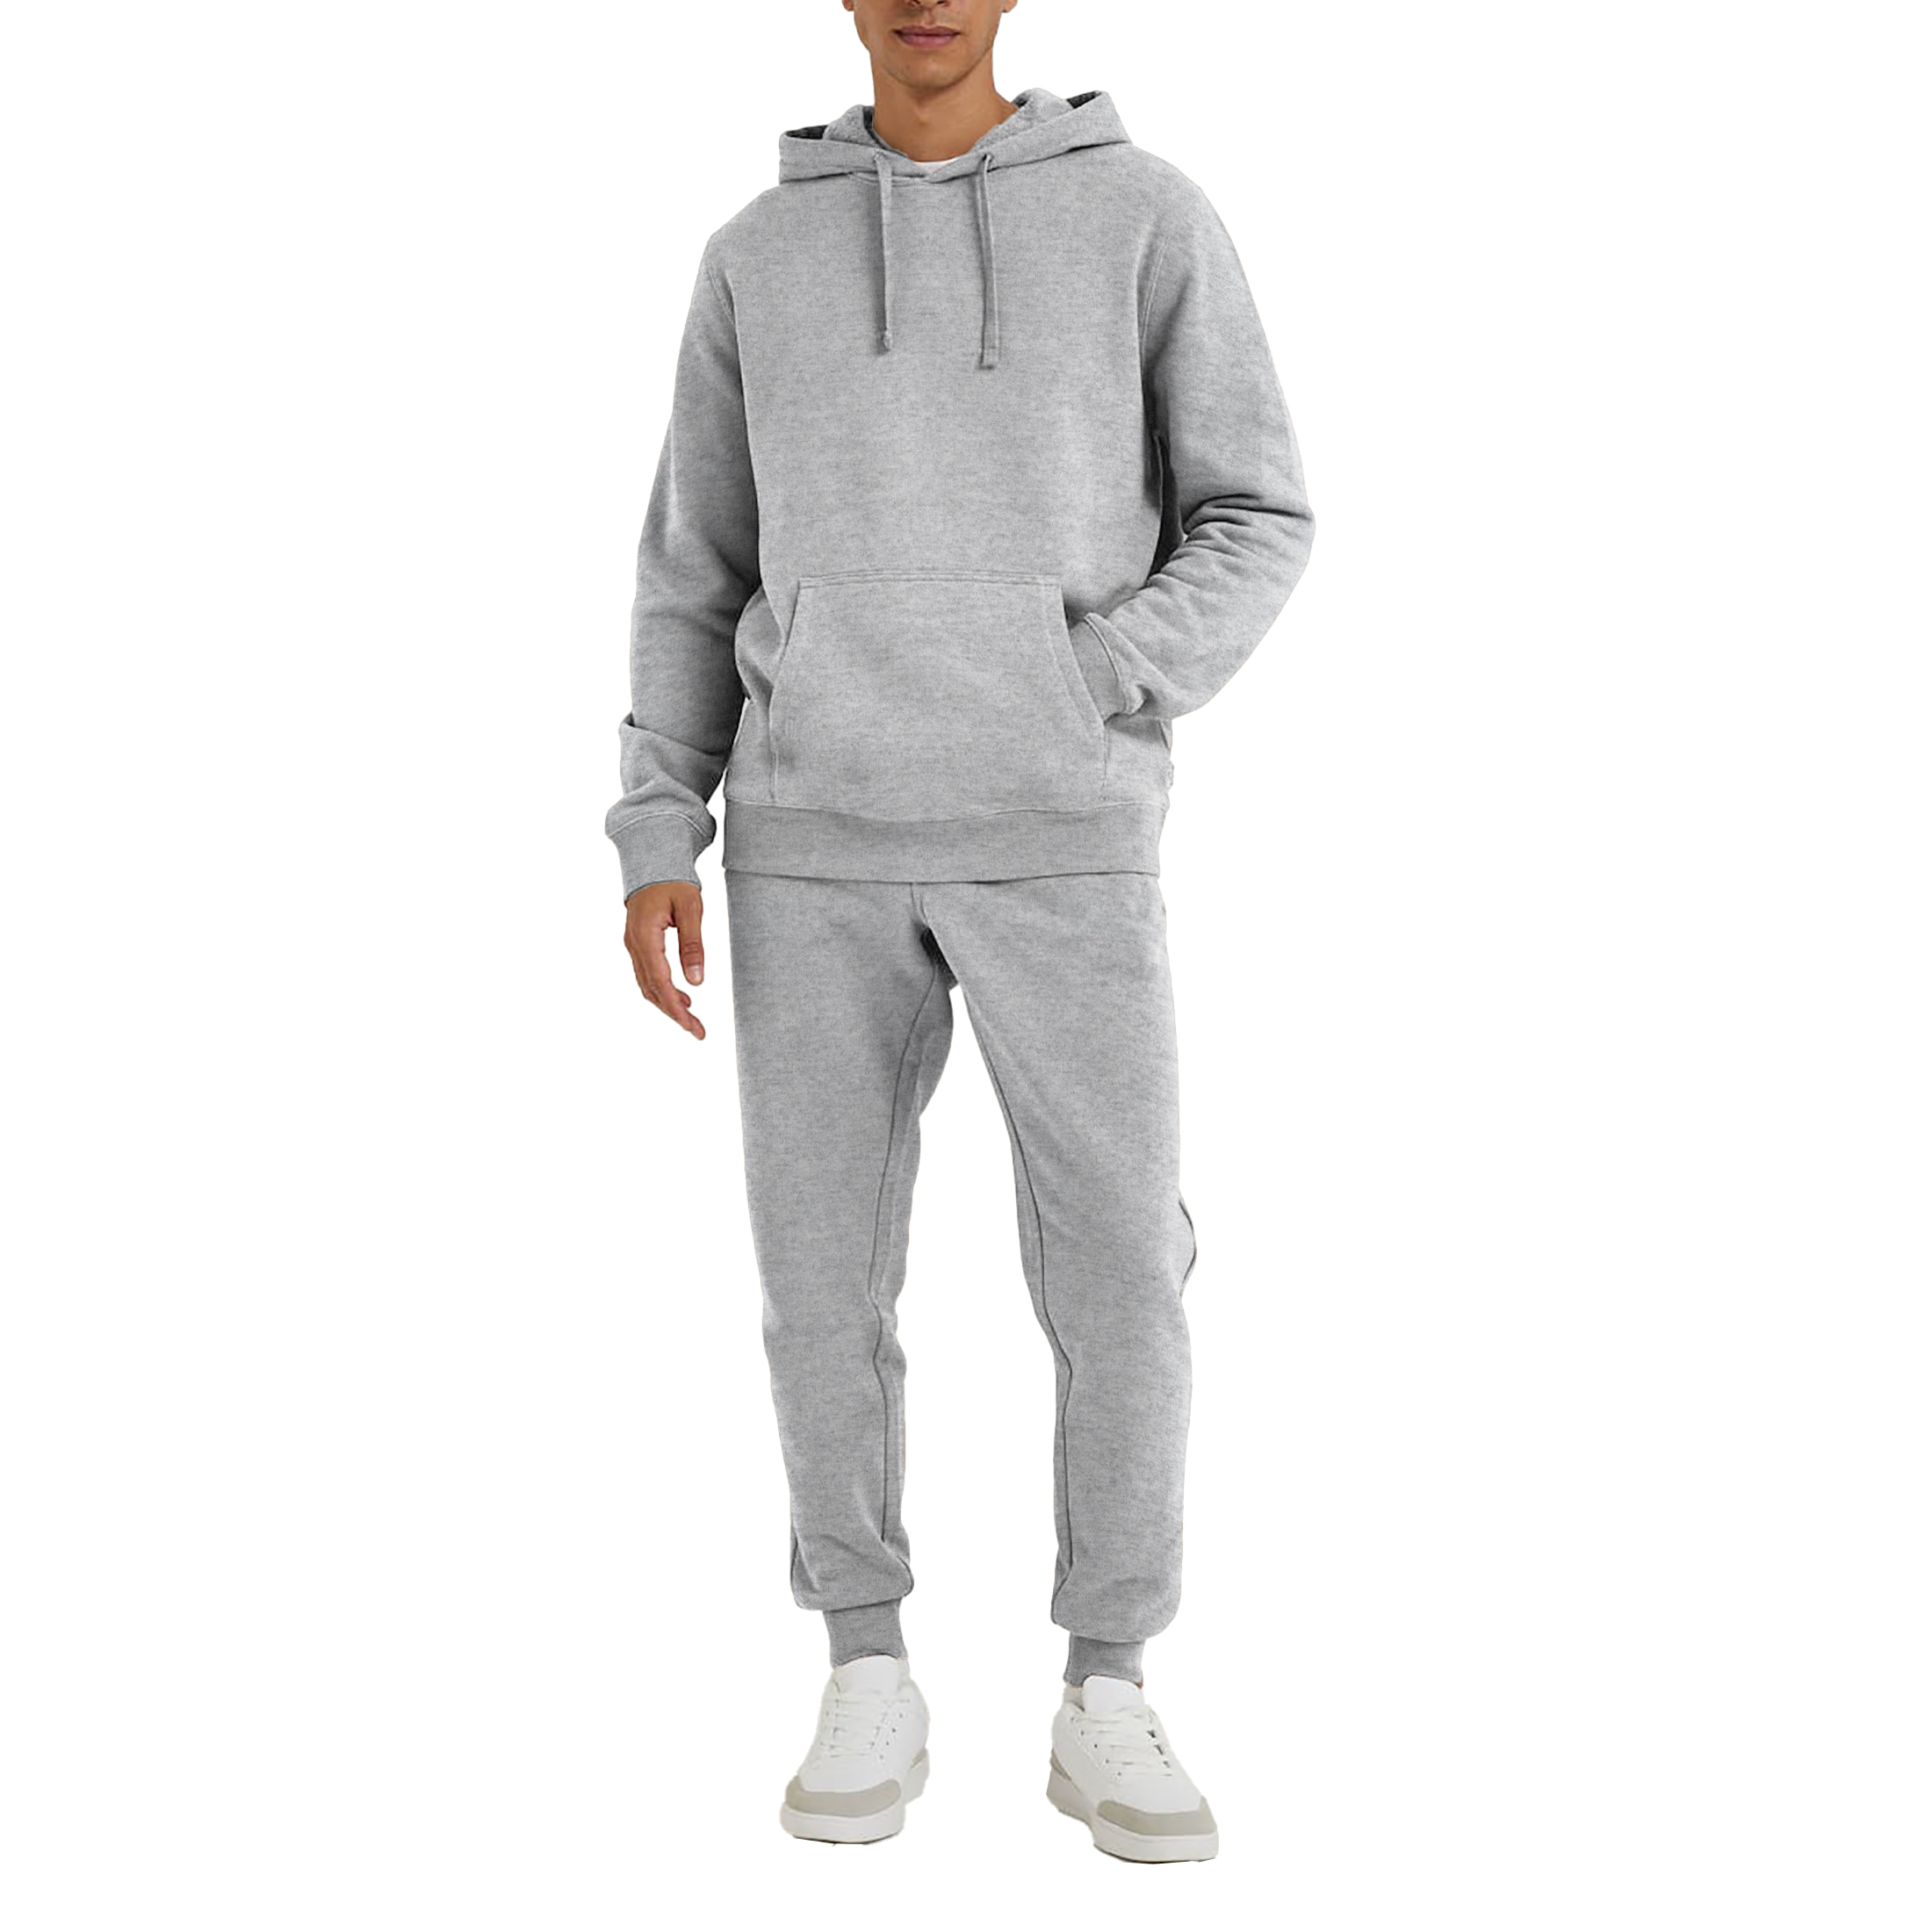 Men's Athletic Warm Jogging Pullover Active Tracksuit - Grey, 4X-Large